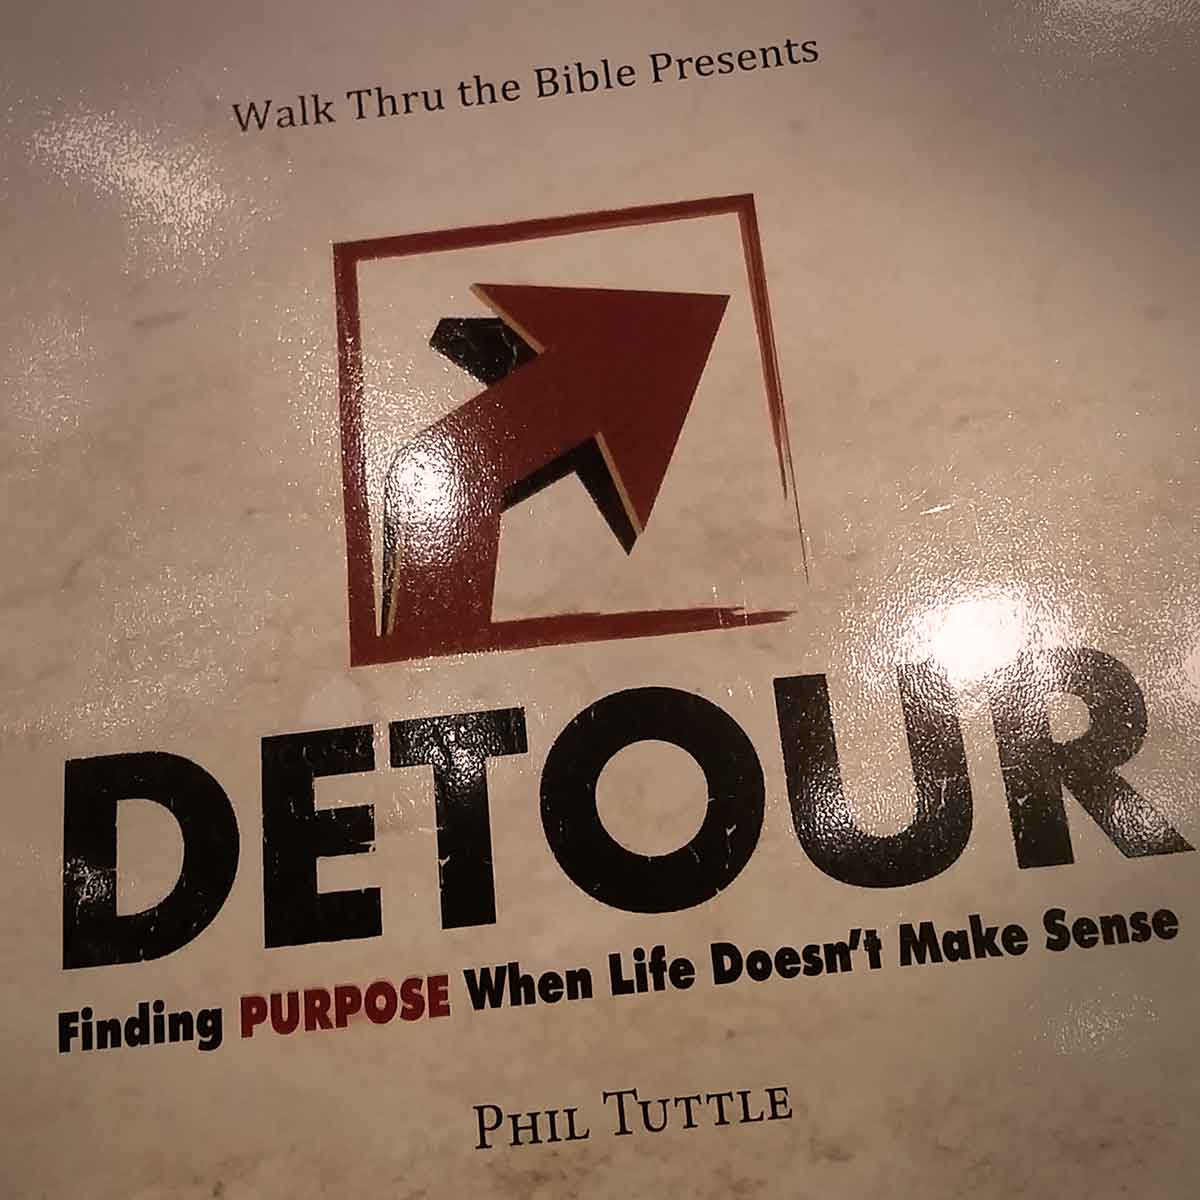 The Detours in our lives